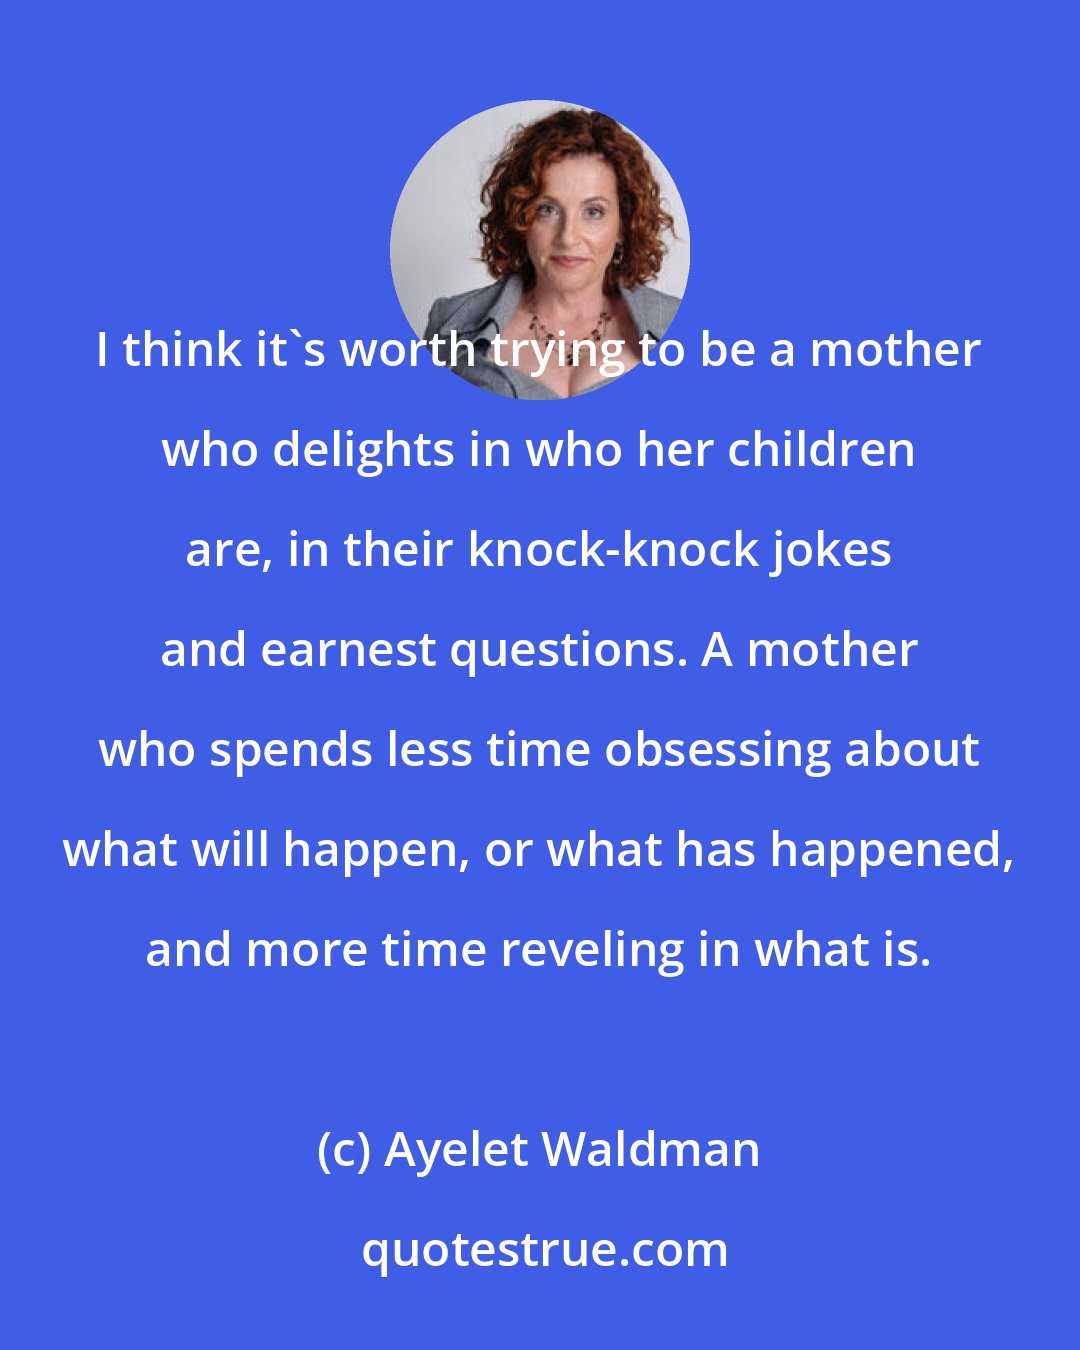 Ayelet Waldman: I think it's worth trying to be a mother who delights in who her children are, in their knock-knock jokes and earnest questions. A mother who spends less time obsessing about what will happen, or what has happened, and more time reveling in what is.